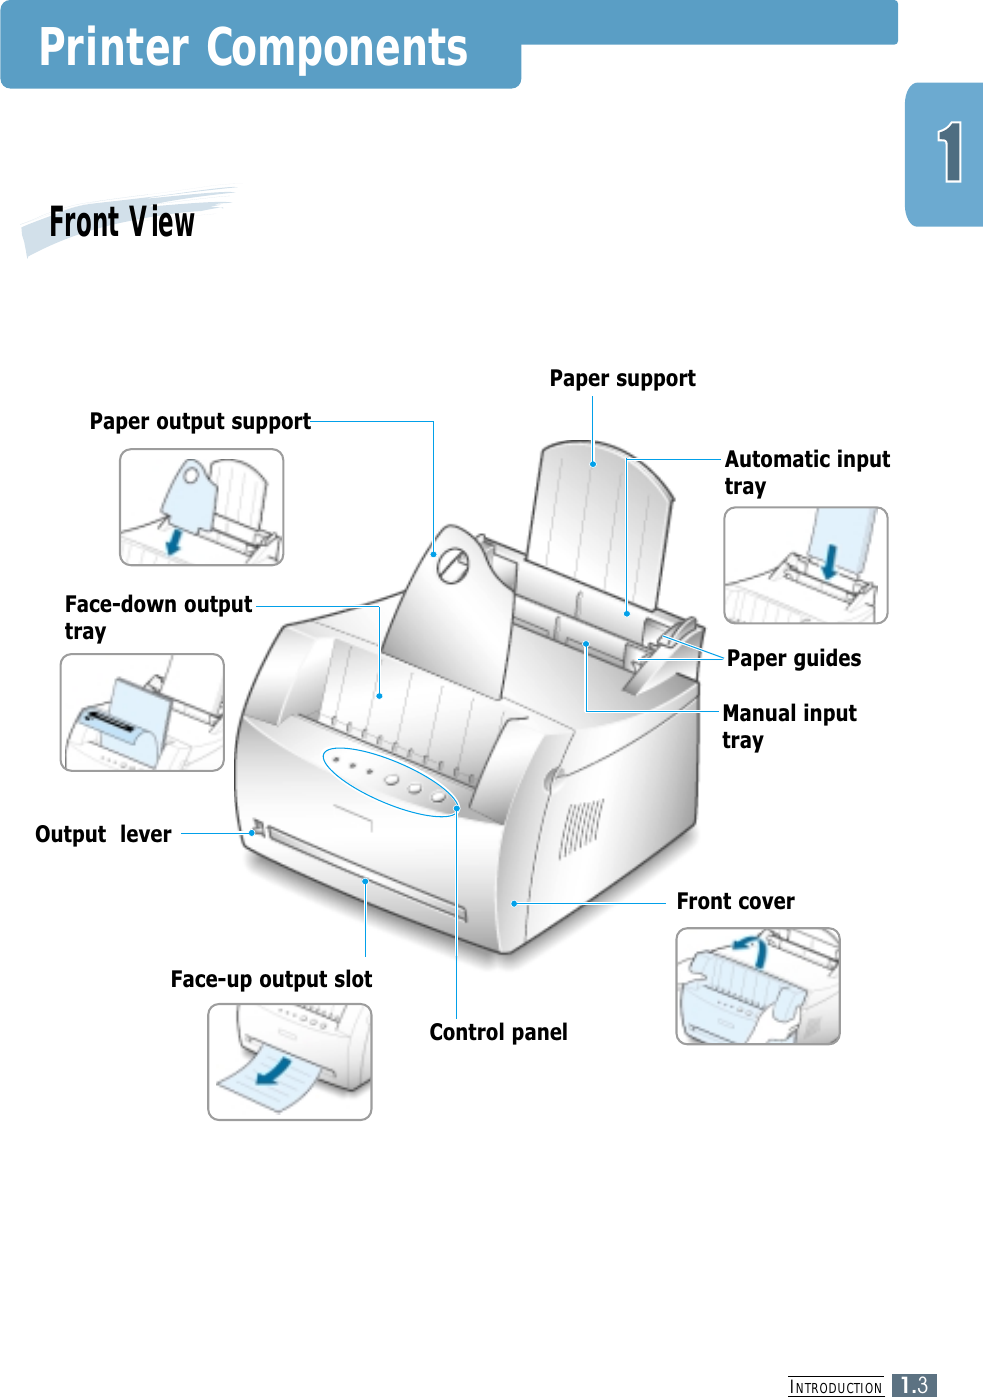 INTRODUCTION1.3Printer ComponentsFront ViewPaper supportFace-down outputtrayOutput  leverPaper output supportFront coverFace-up output slotControl panelAutomatic inputtrayManual inputtrayPaper guides